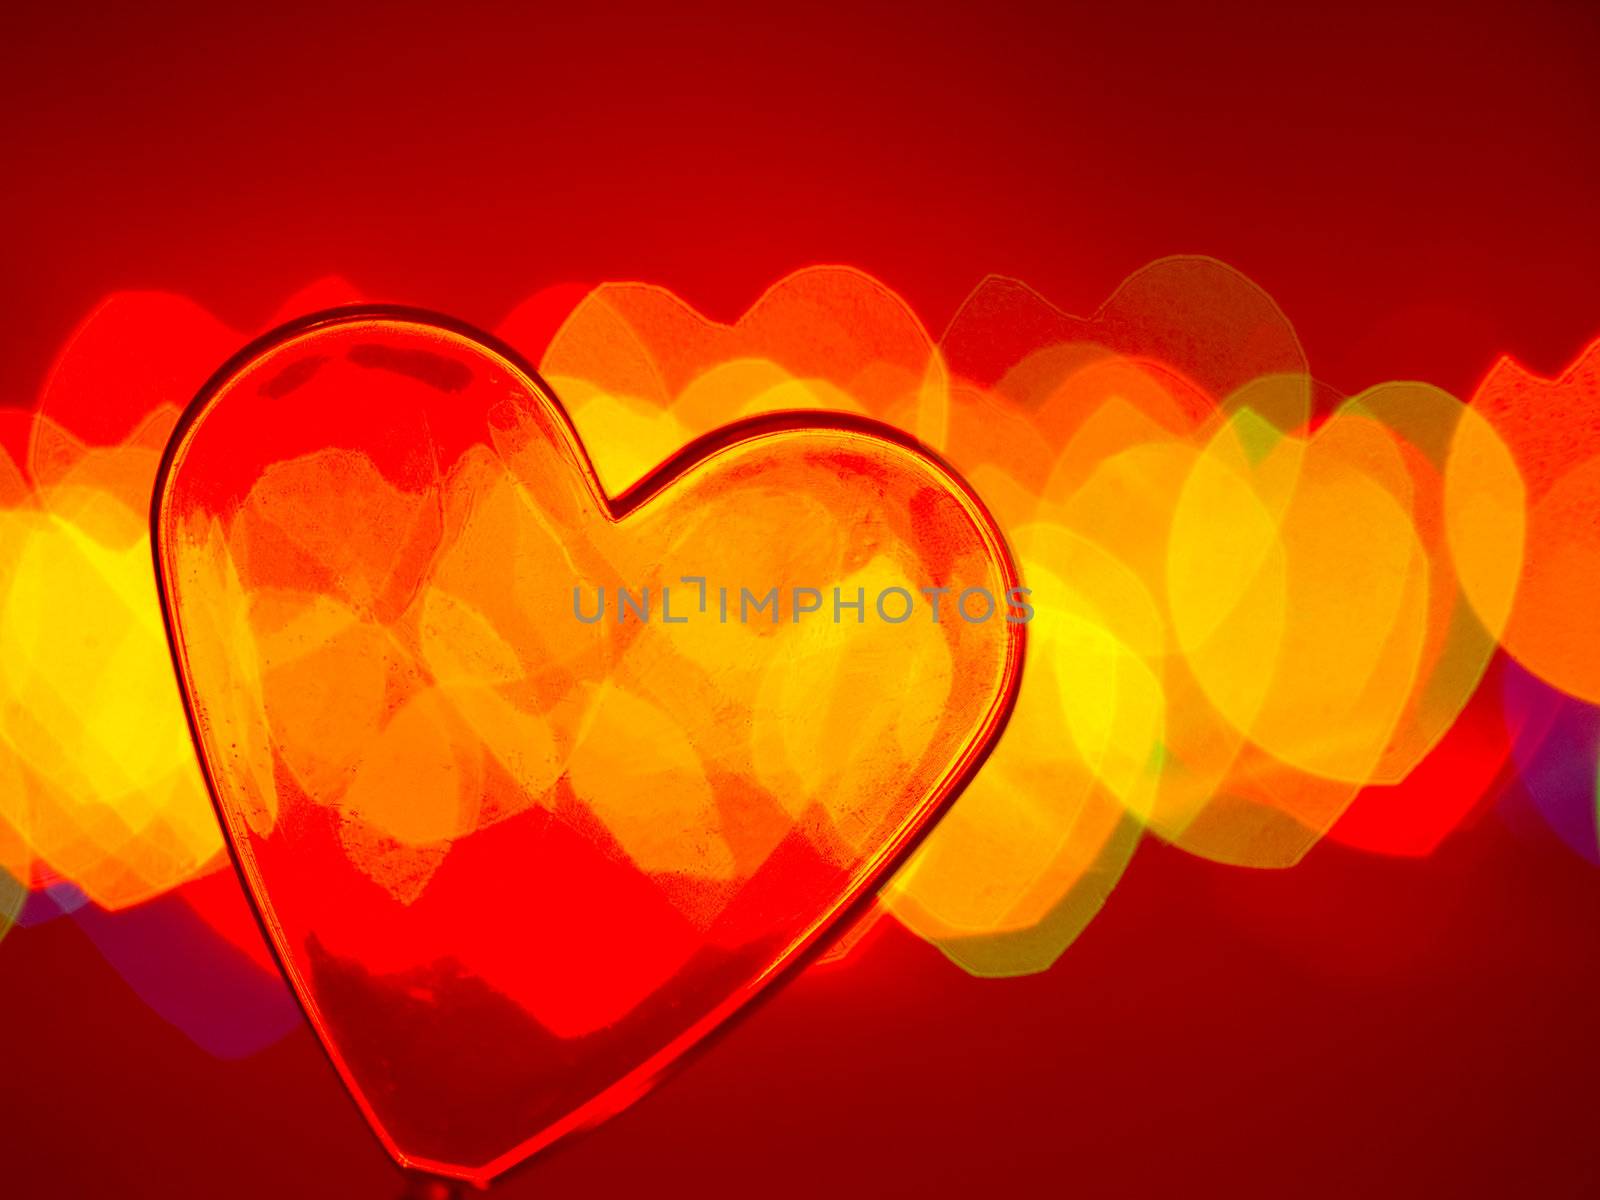 Red transparent plastic heart with blured lights in background, very shallow DOF